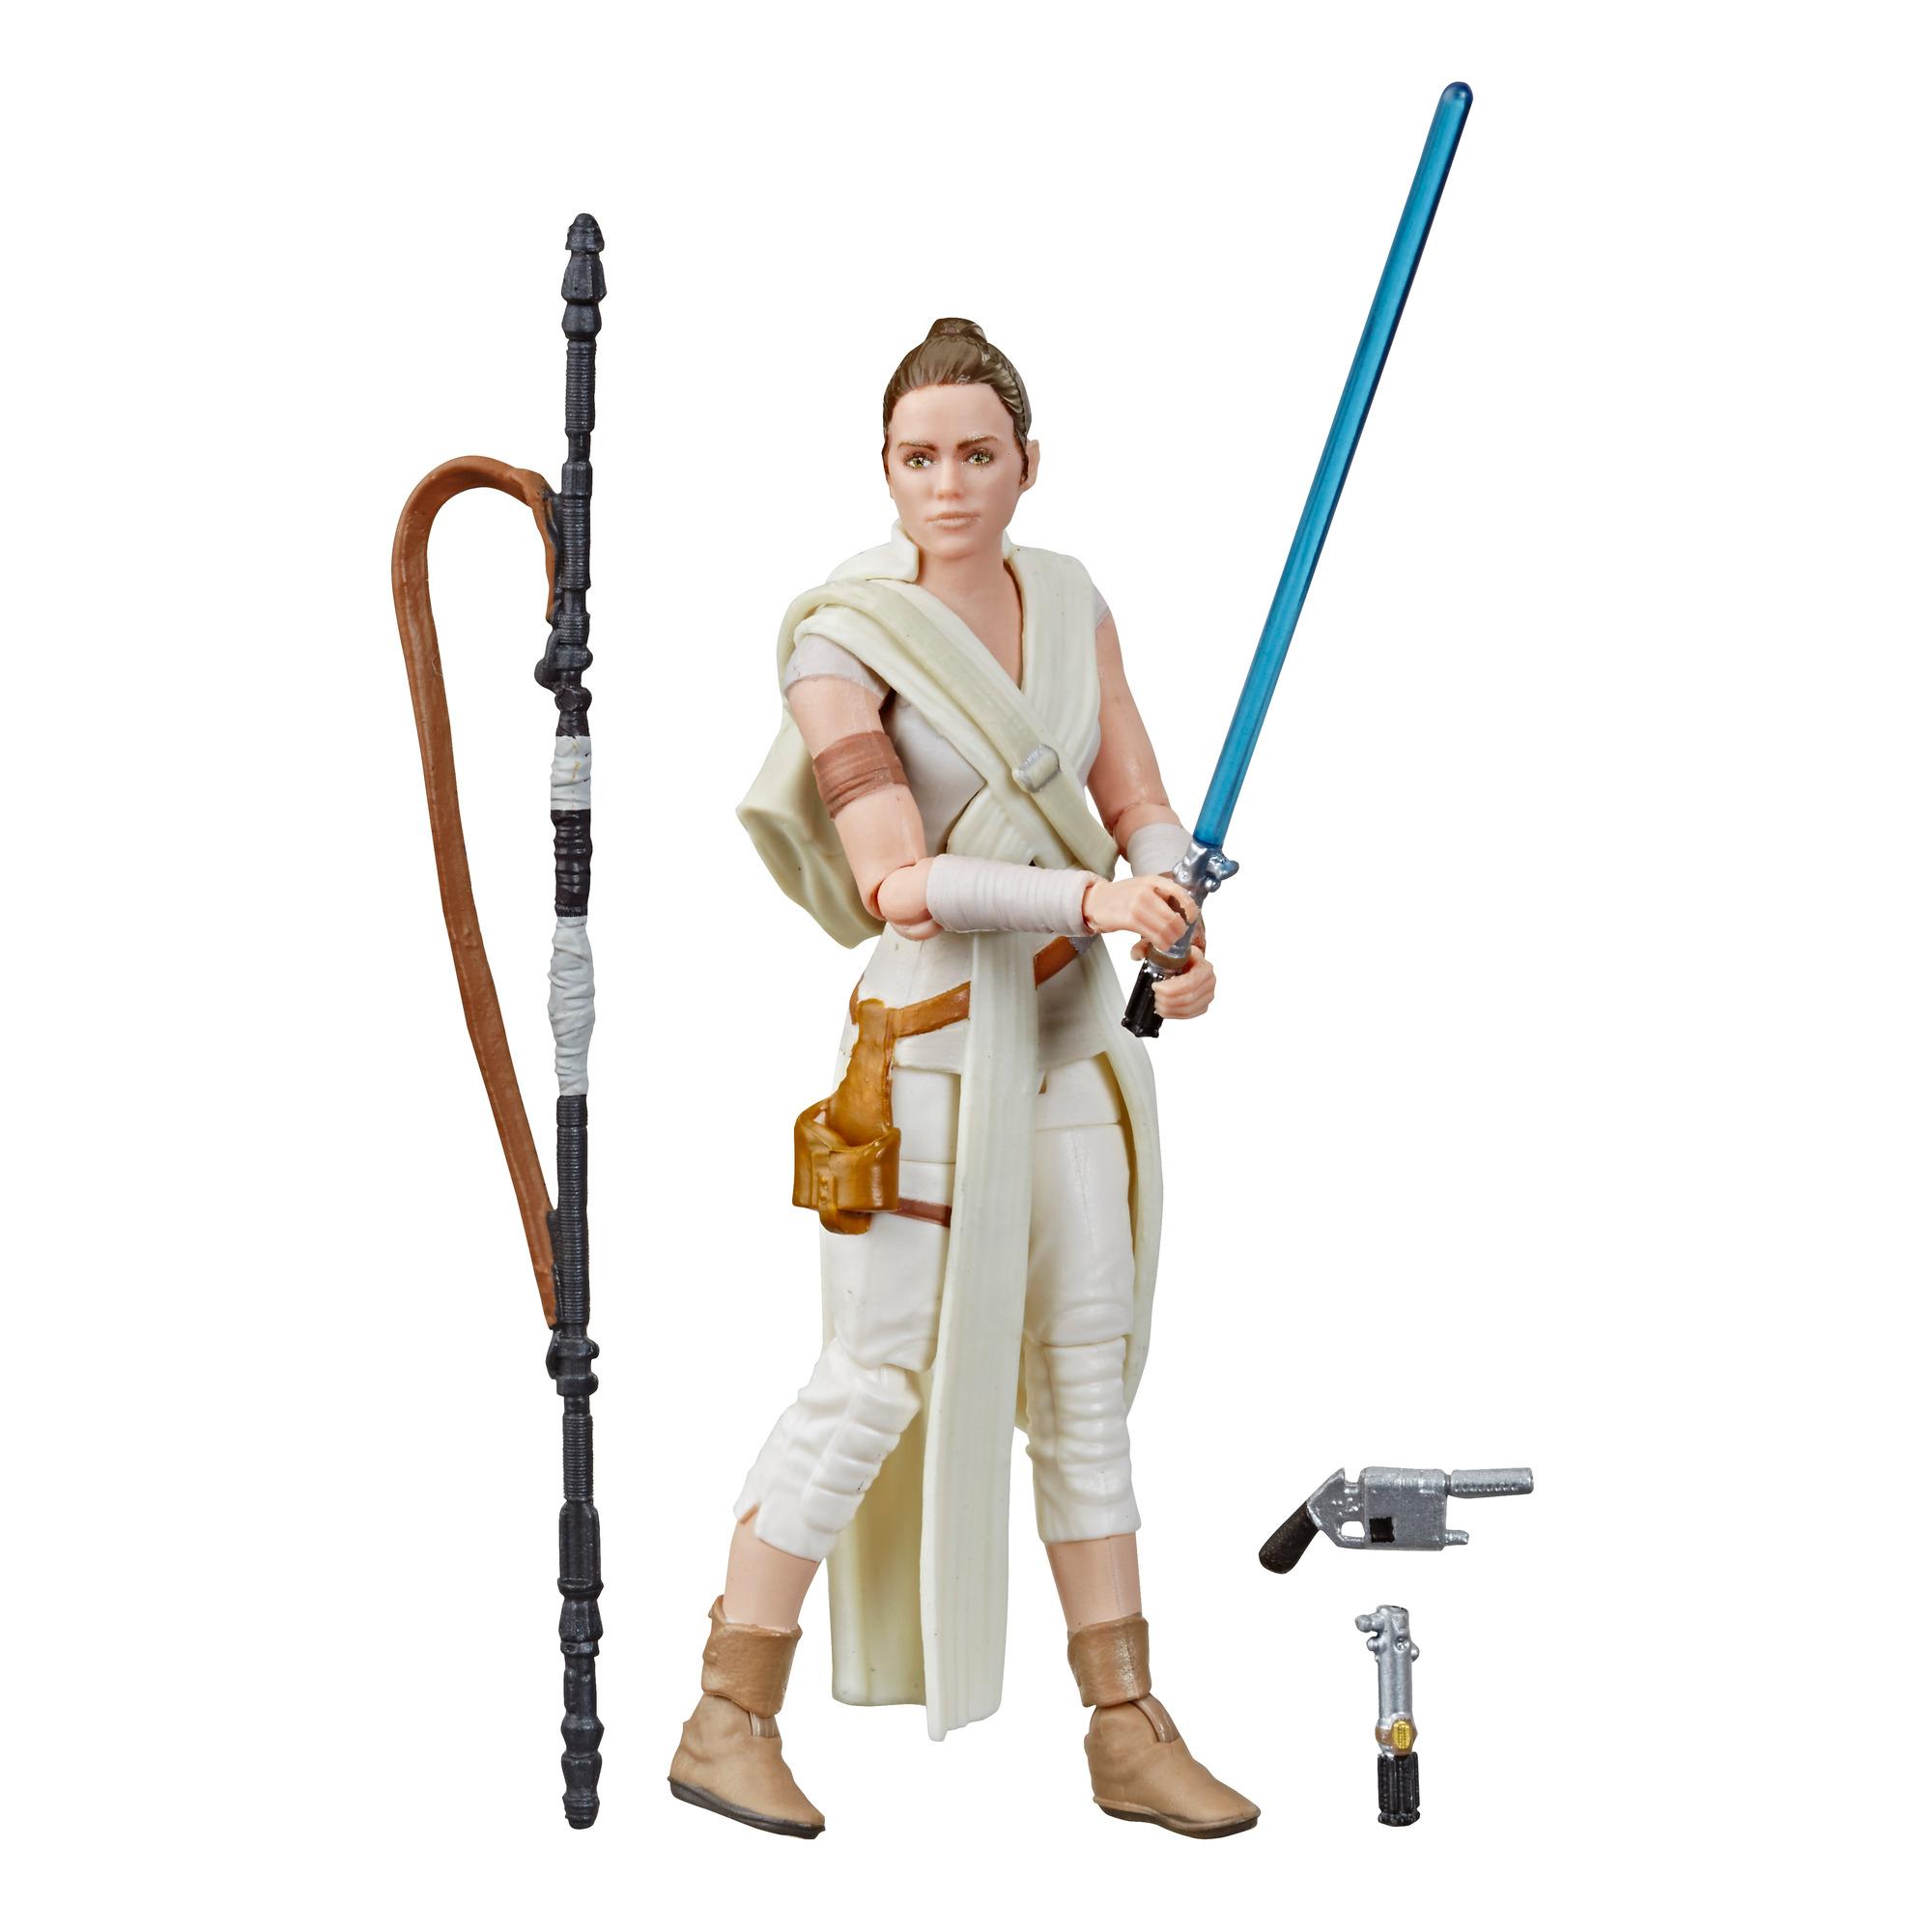 Details about   Star Wars The Rise Of Skywalker Action Figure Rey 13950594 New Boxed Hasbro 